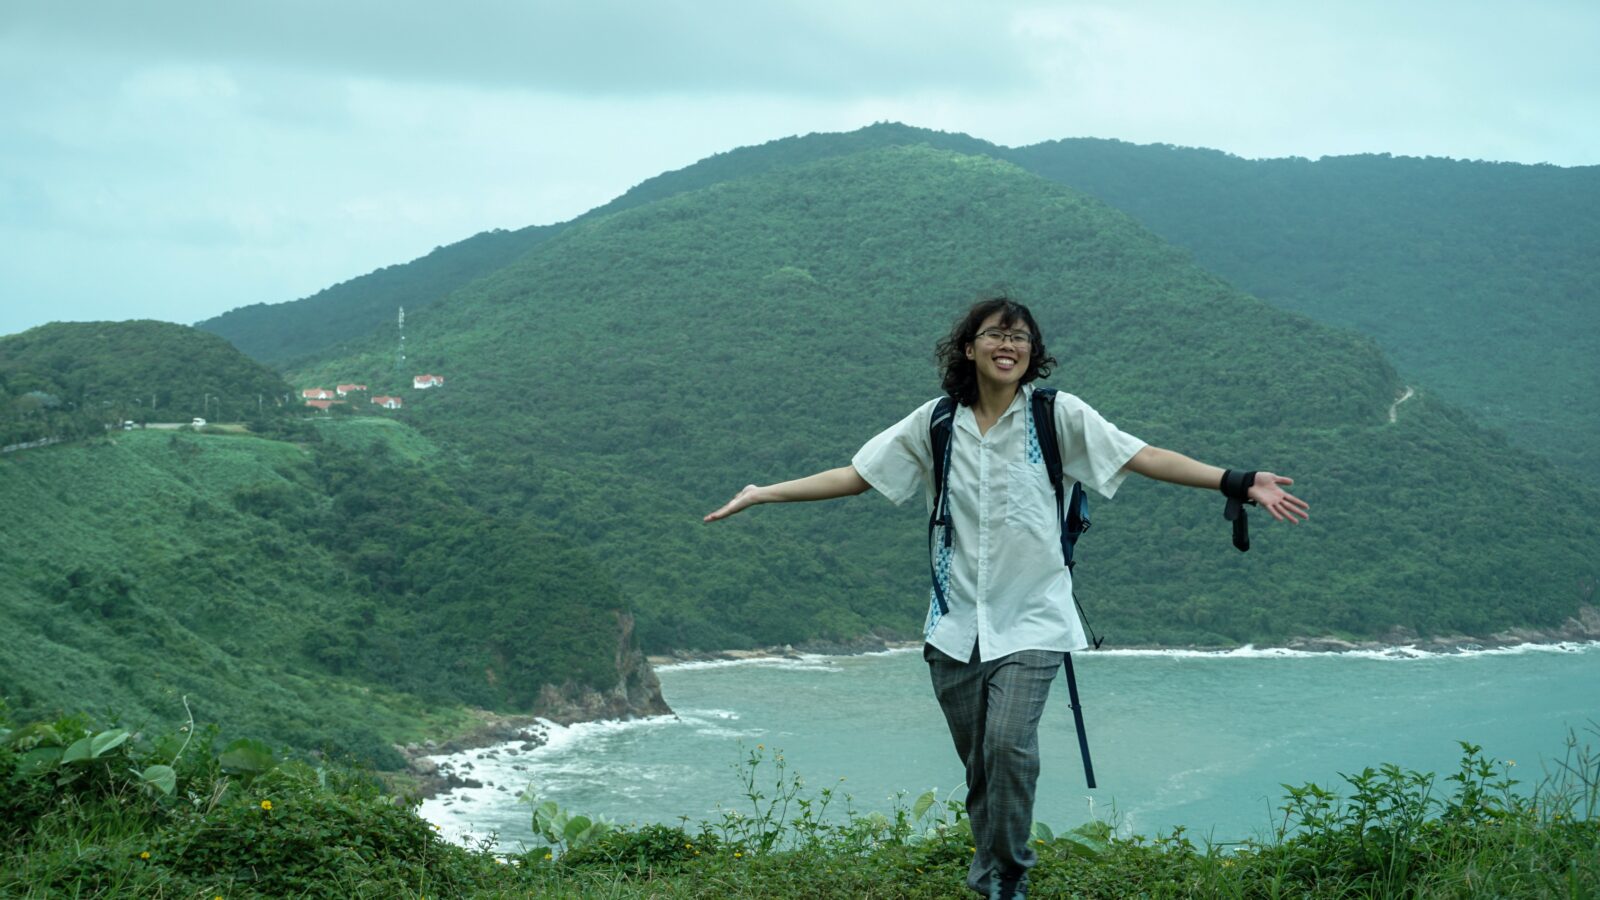 Meggie in a white shirt standing in front of the green forest and blue bay of Vietnam's Son Tra Peninsula.